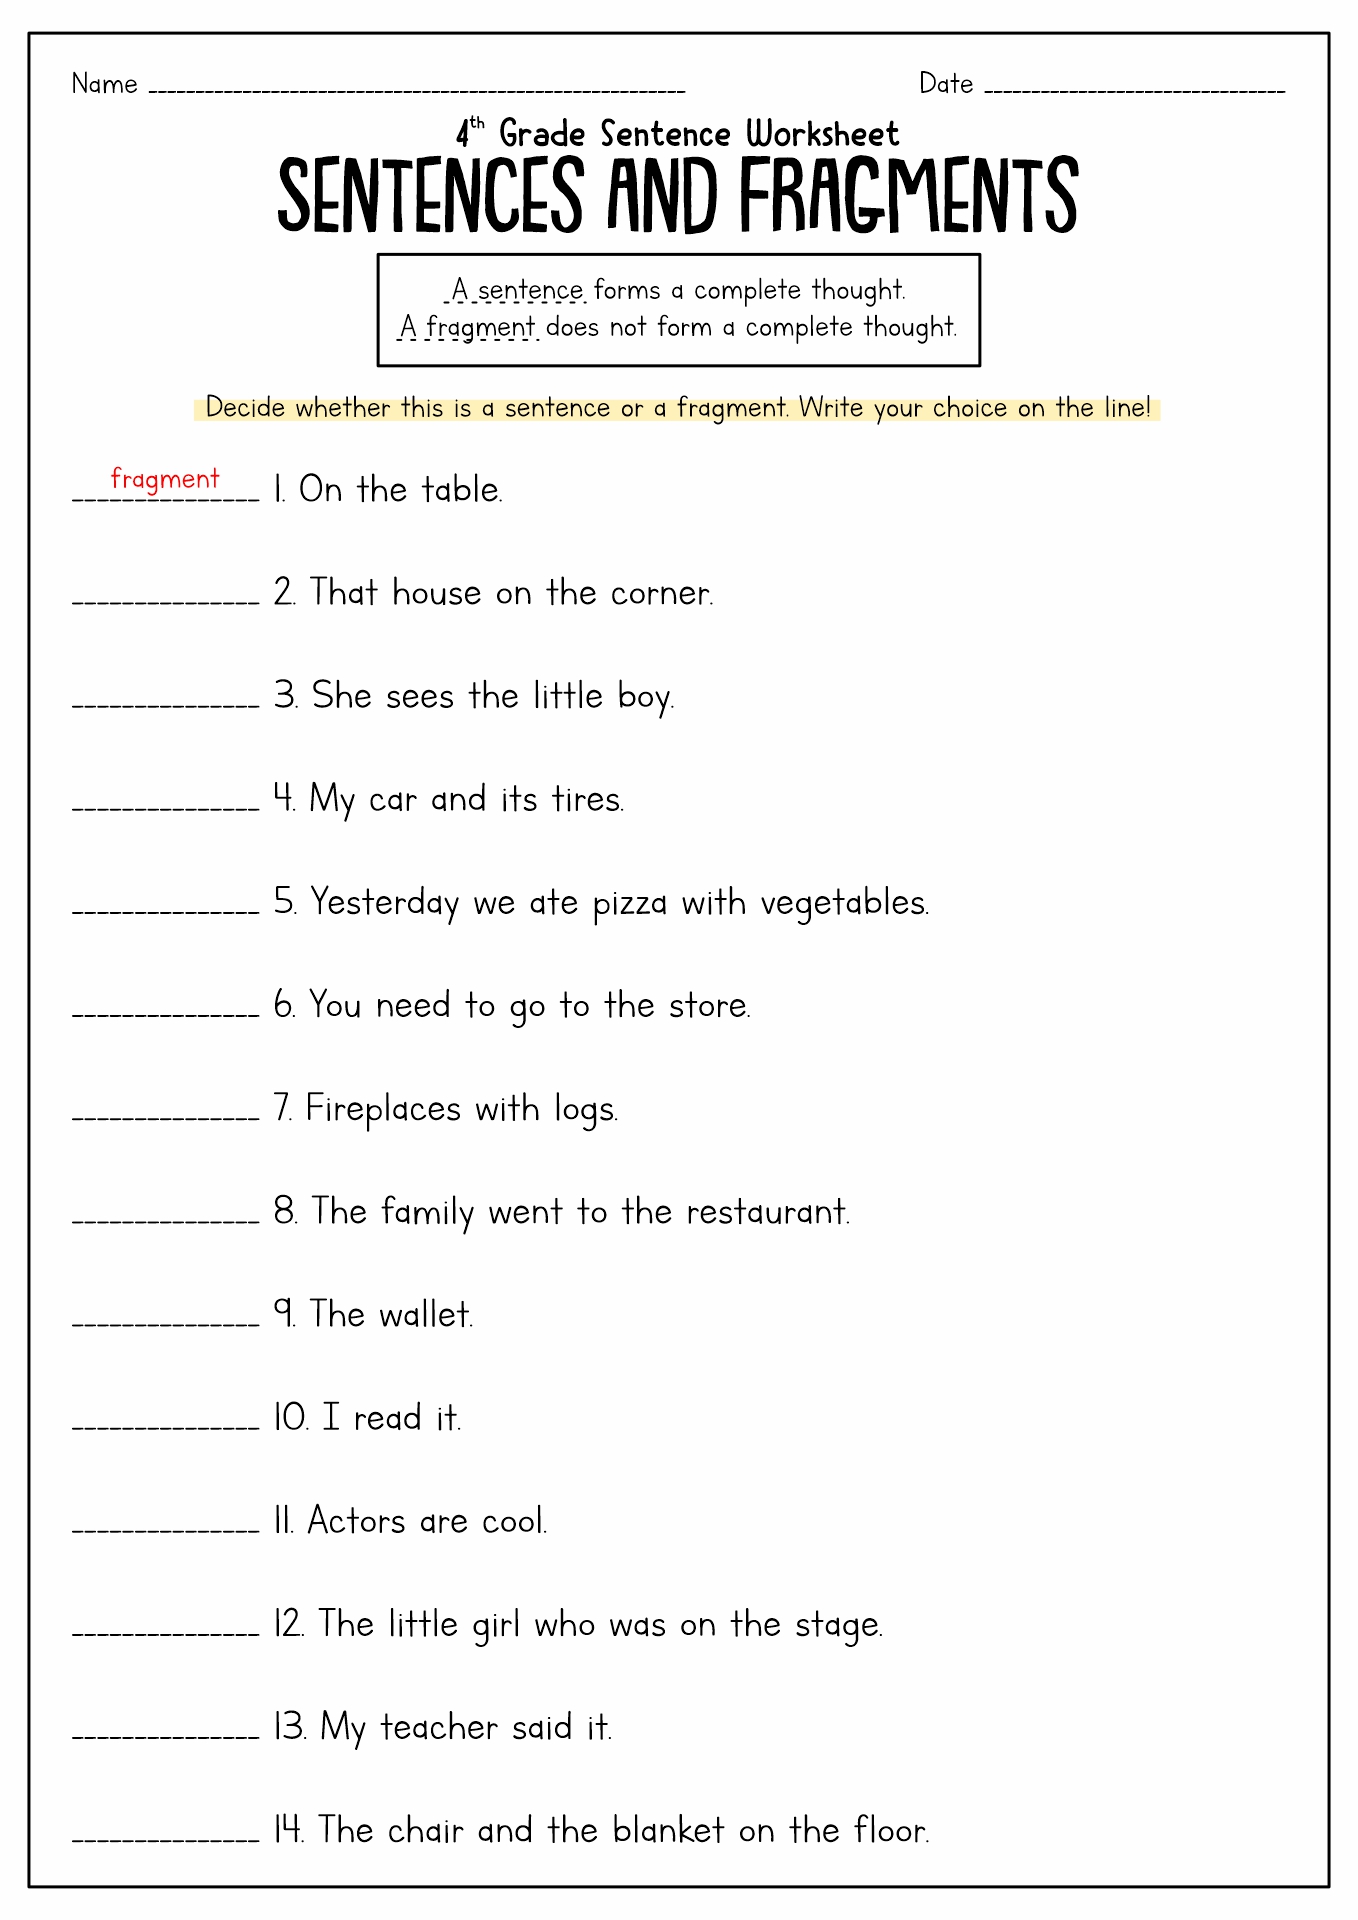 Editing Sentence Fragments In Context Worksheets